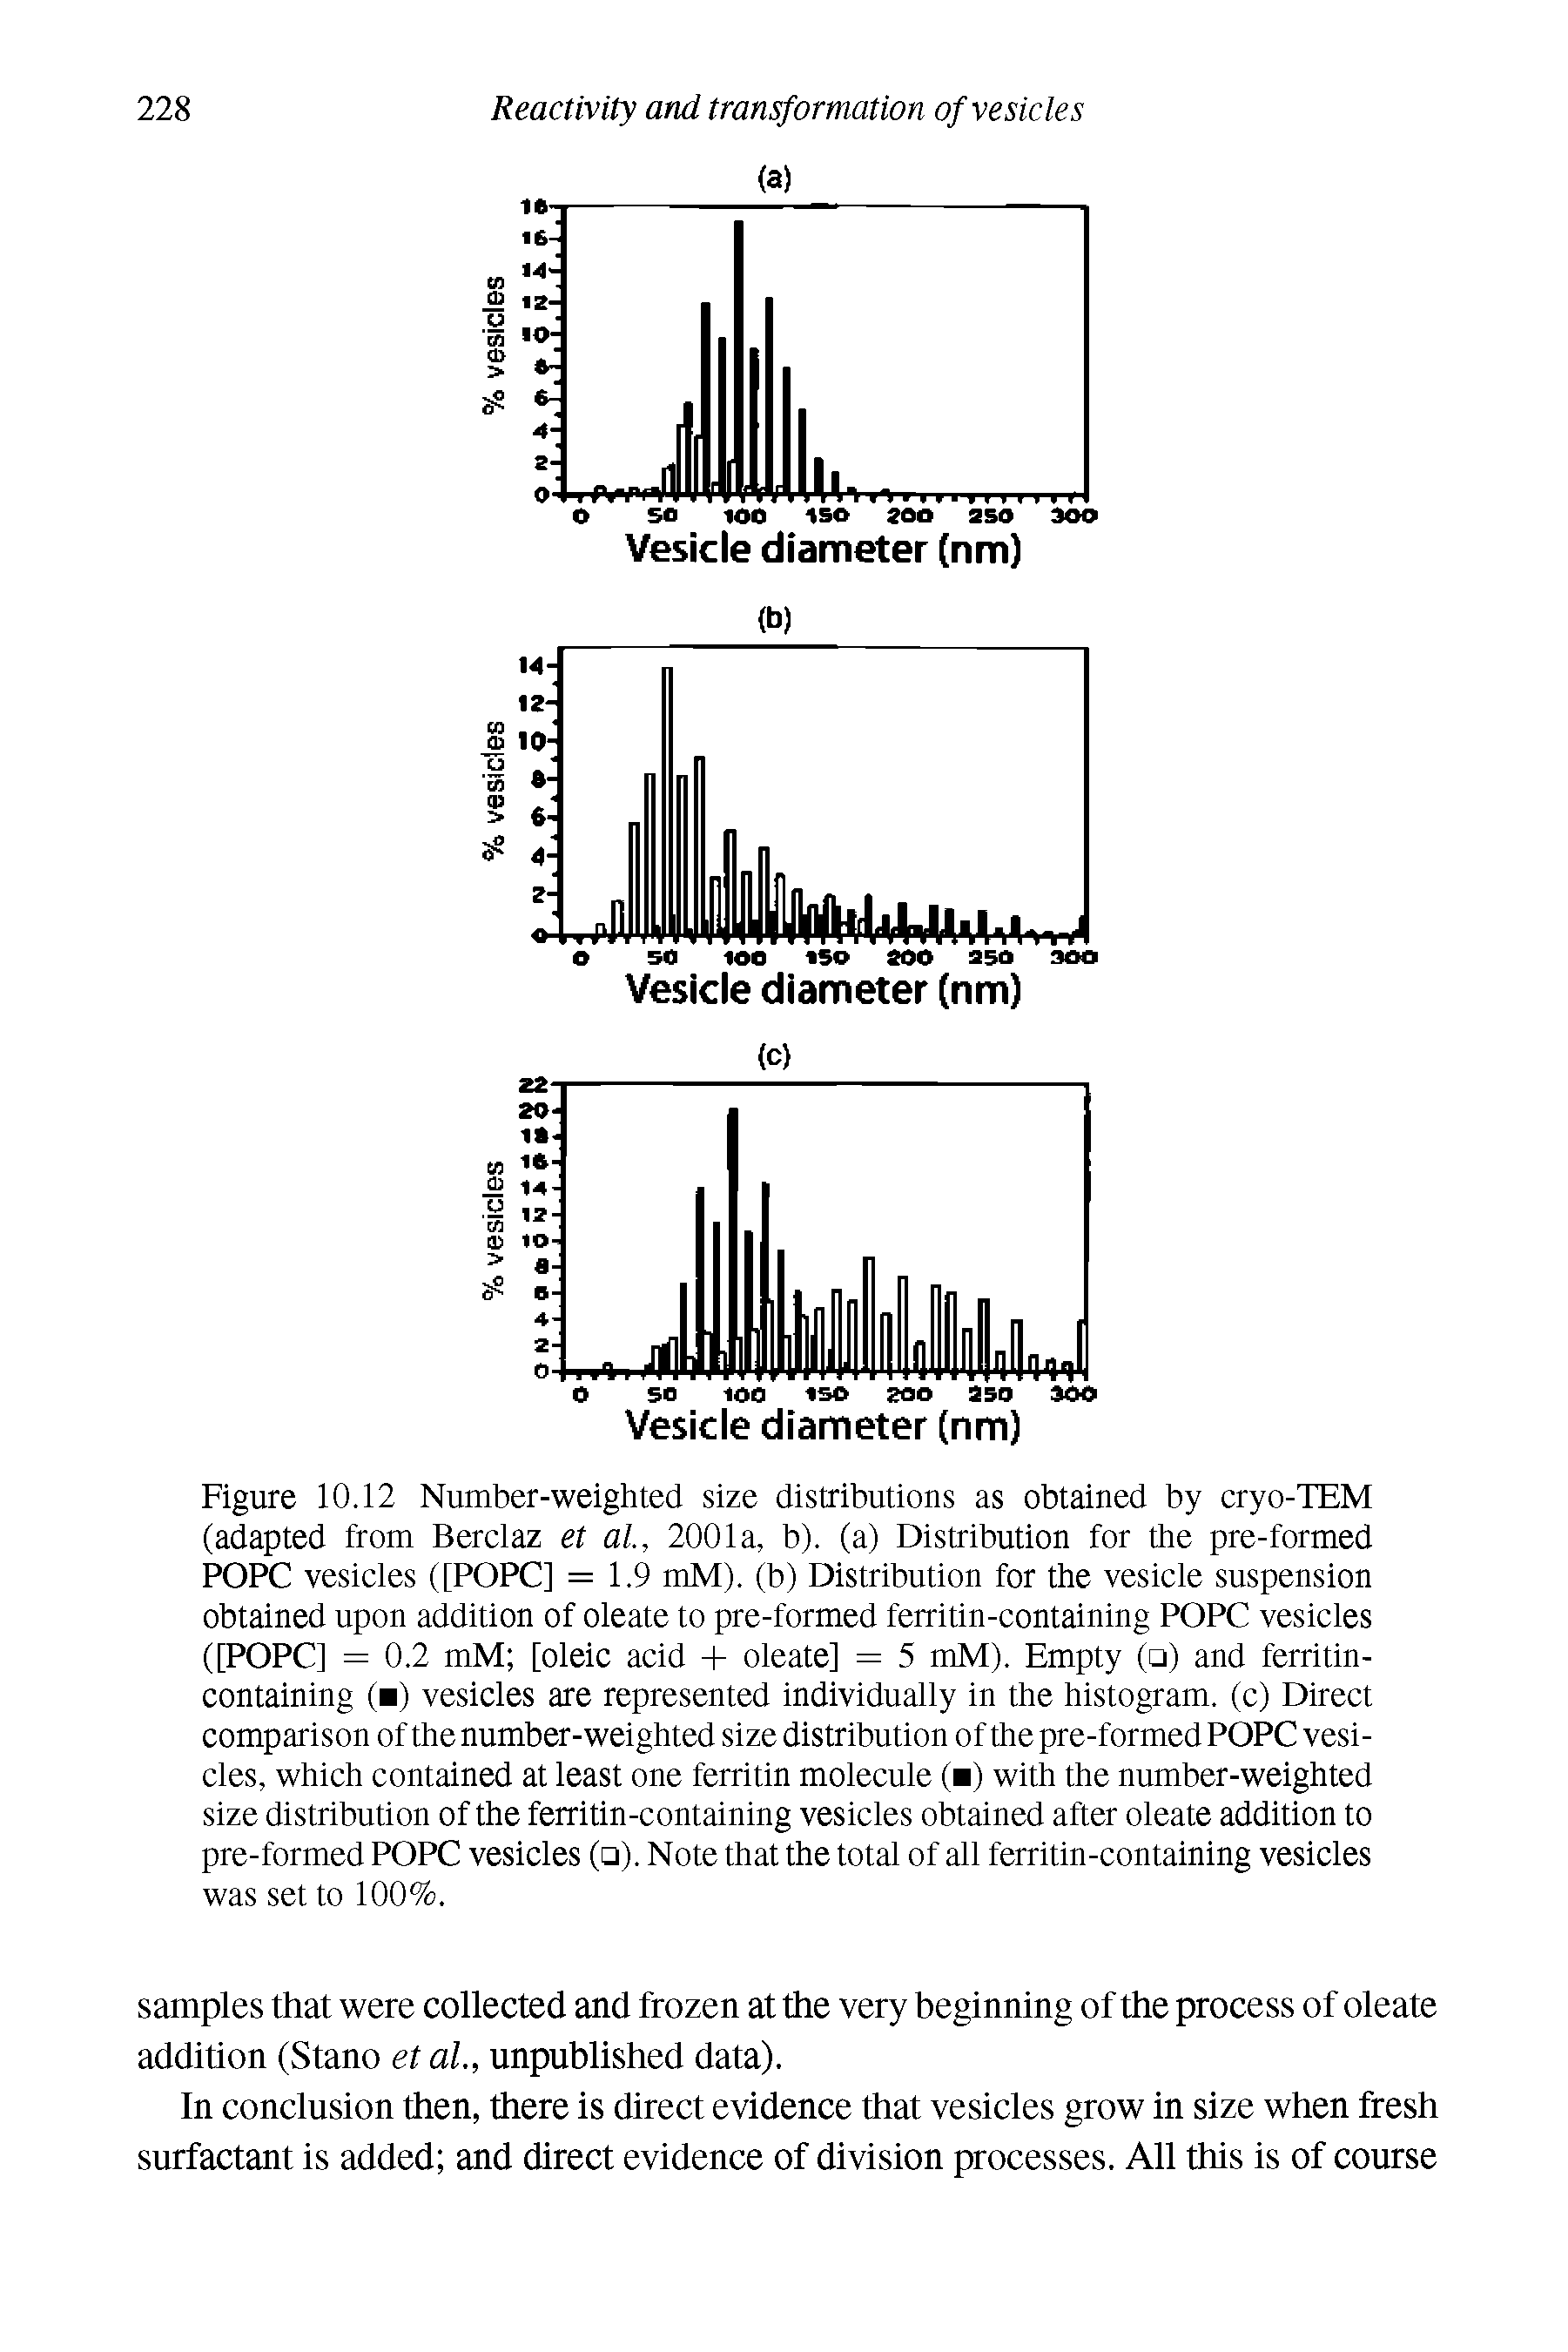 Figure 10.12 Number-weighted size distributions as obtained by cryo-TEM (adapted from Berclaz et al, 2001a, b). (a) Distribution for the pre-formed POPC vesicles ([POPC] = 1.9 mM). (b) Distribution for the vesicle suspension obtained upon addition of oleate to pre-formed ferritin-containing POPC vesicles ([POPC] = 0.2 mM [oleic acid -I- oleate] = 5 mM). Empty ( ) and ferritin-containing ( ) vesicles are represented individually in the histogram, (c) Direct comparison of the number-weighted size distribution of the pre-formed POPC vesicles, which contained at least one ferritin molecule ( ) with the number-weighted size distribution of the ferritin-containing vesicles obtained after oleate addition to pre-formed POPC vesicles ( ). Note that the total of all ferritin-containing vesicles was set to 100%.